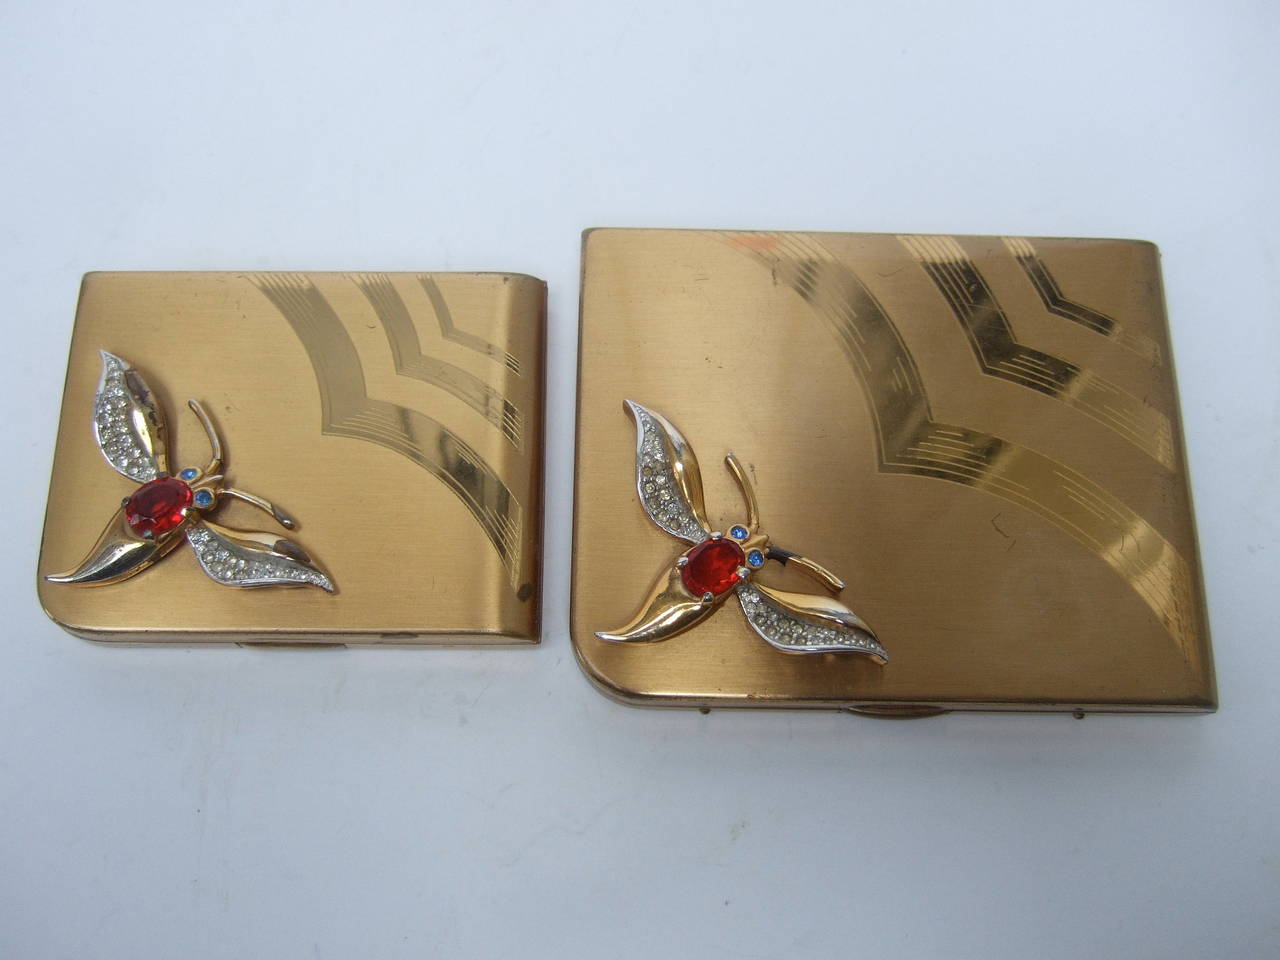 Art Deco Jeweled cigarette case & vanity compact set c 1950
The opulent retro cigarette case & vanity compact are embellished
with crystal butterflies. The fluttering butterflies are encrusted with
a large ruby color crystal accented with